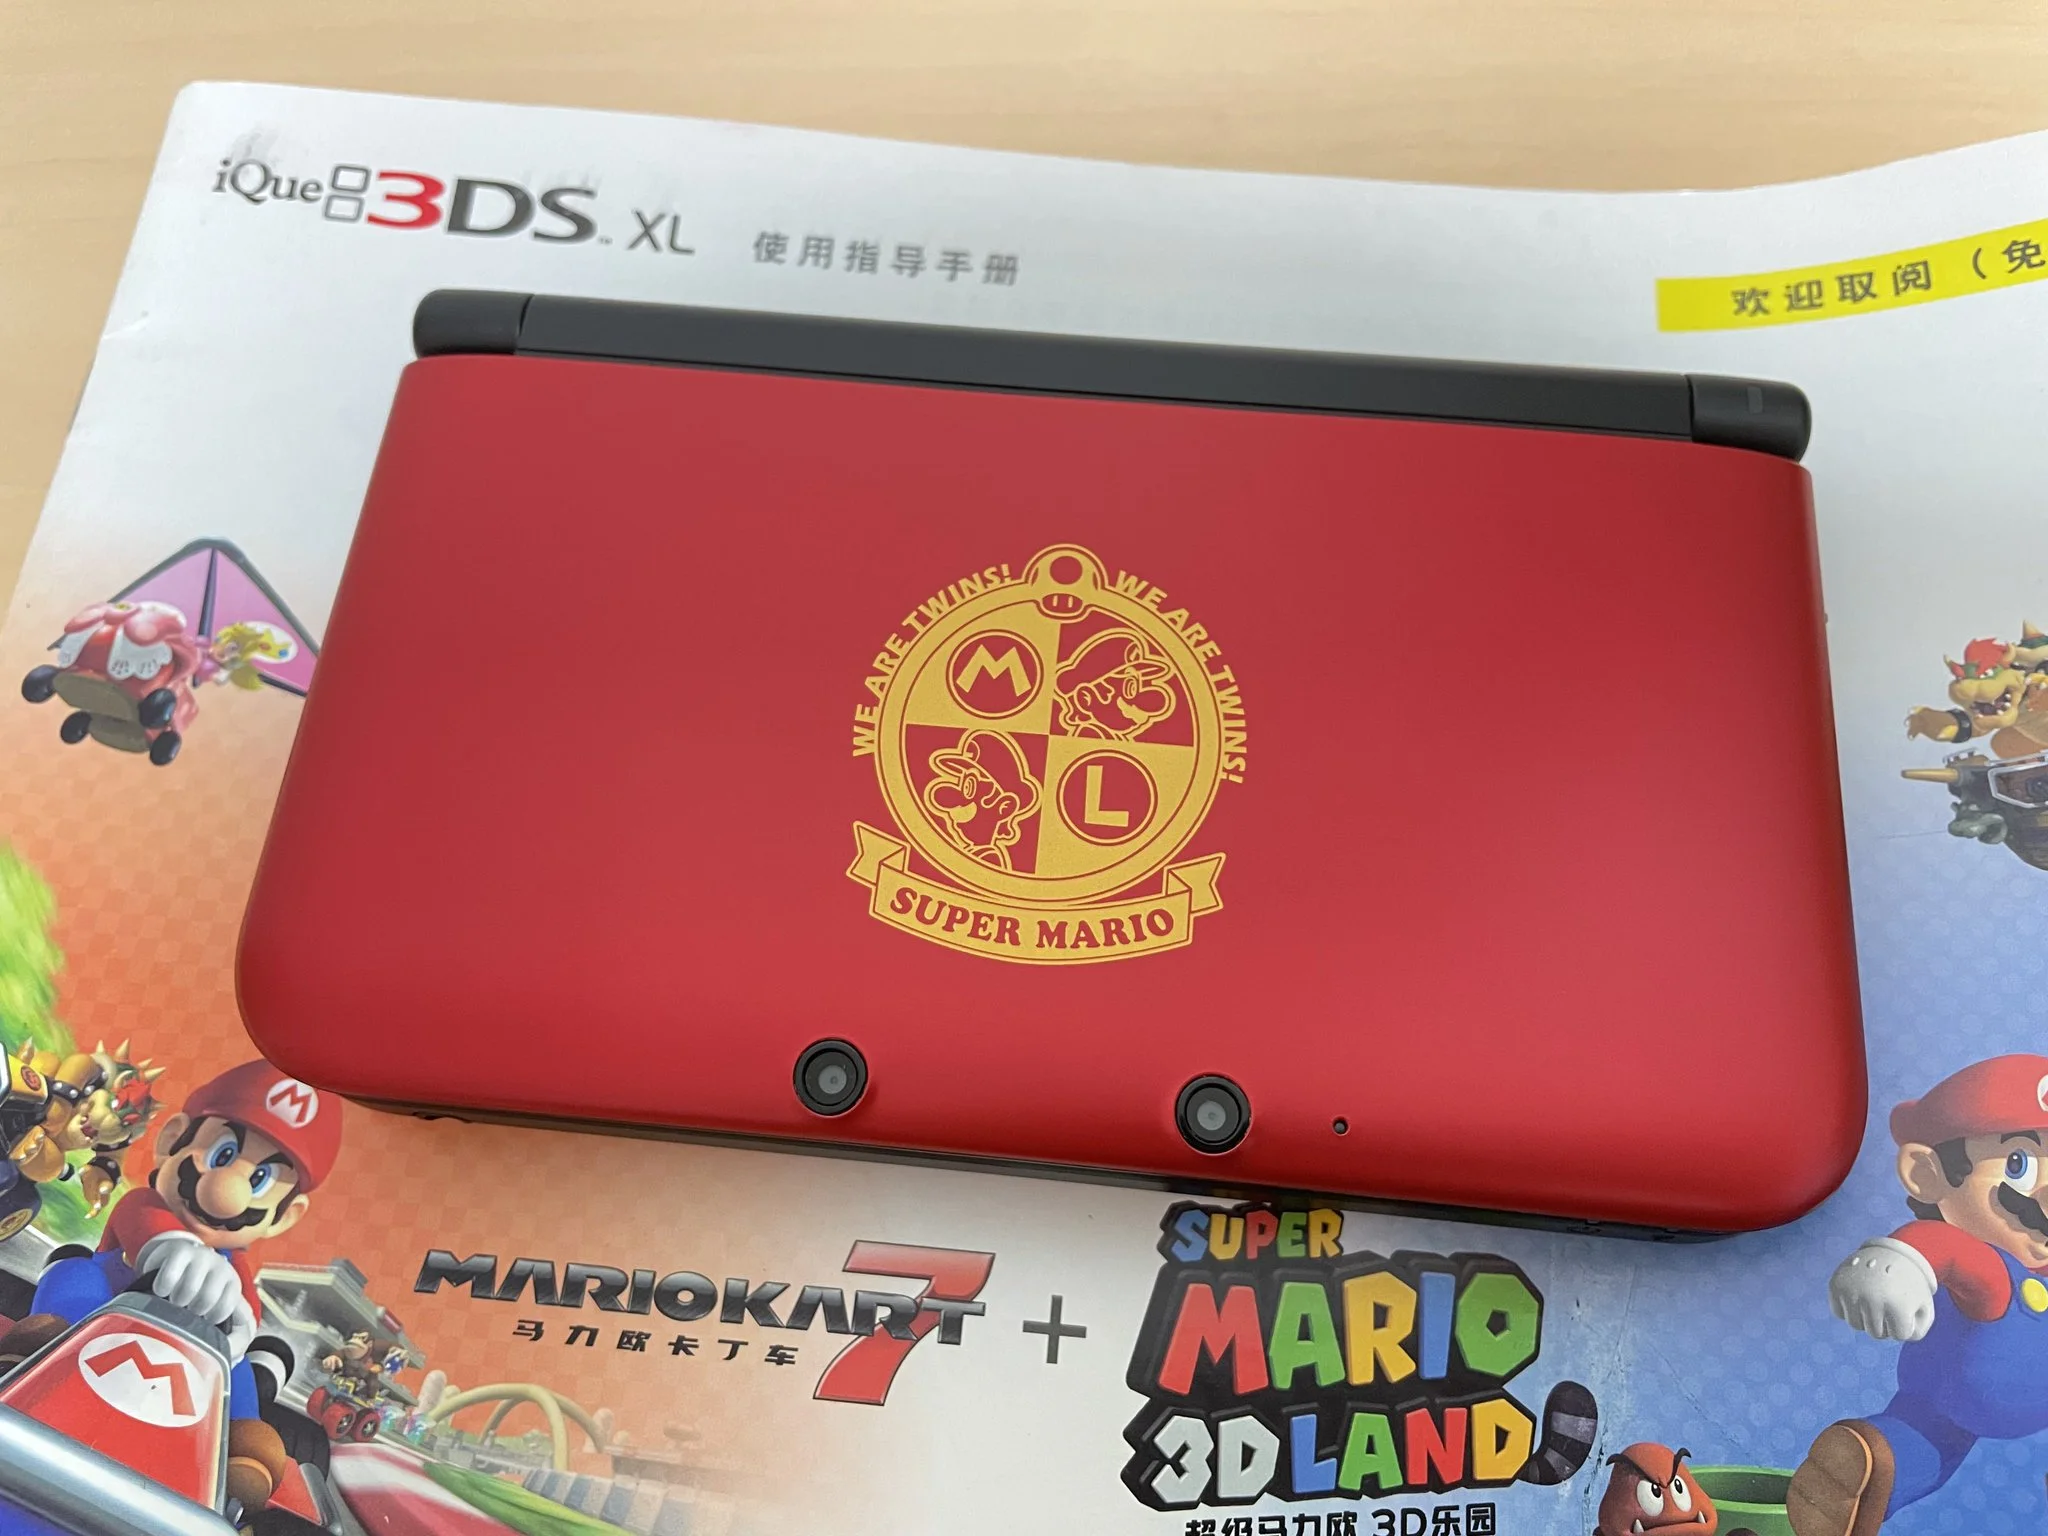  iQue 3DS XL Mario Red &amp; Gold [CN]